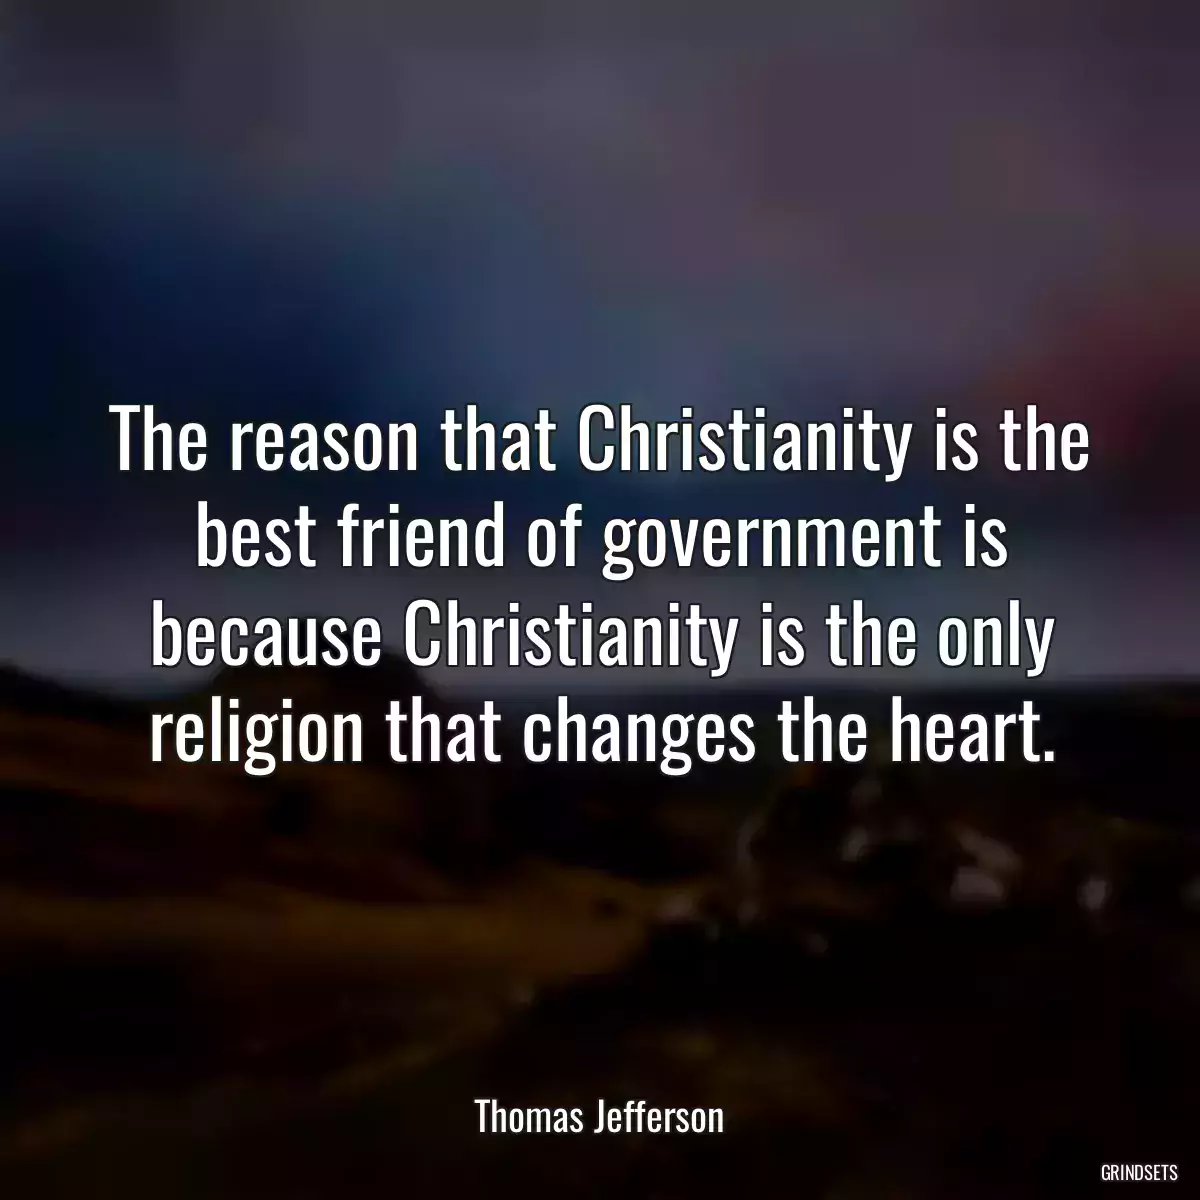 The reason that Christianity is the best friend of government is because Christianity is the only religion that changes the heart.